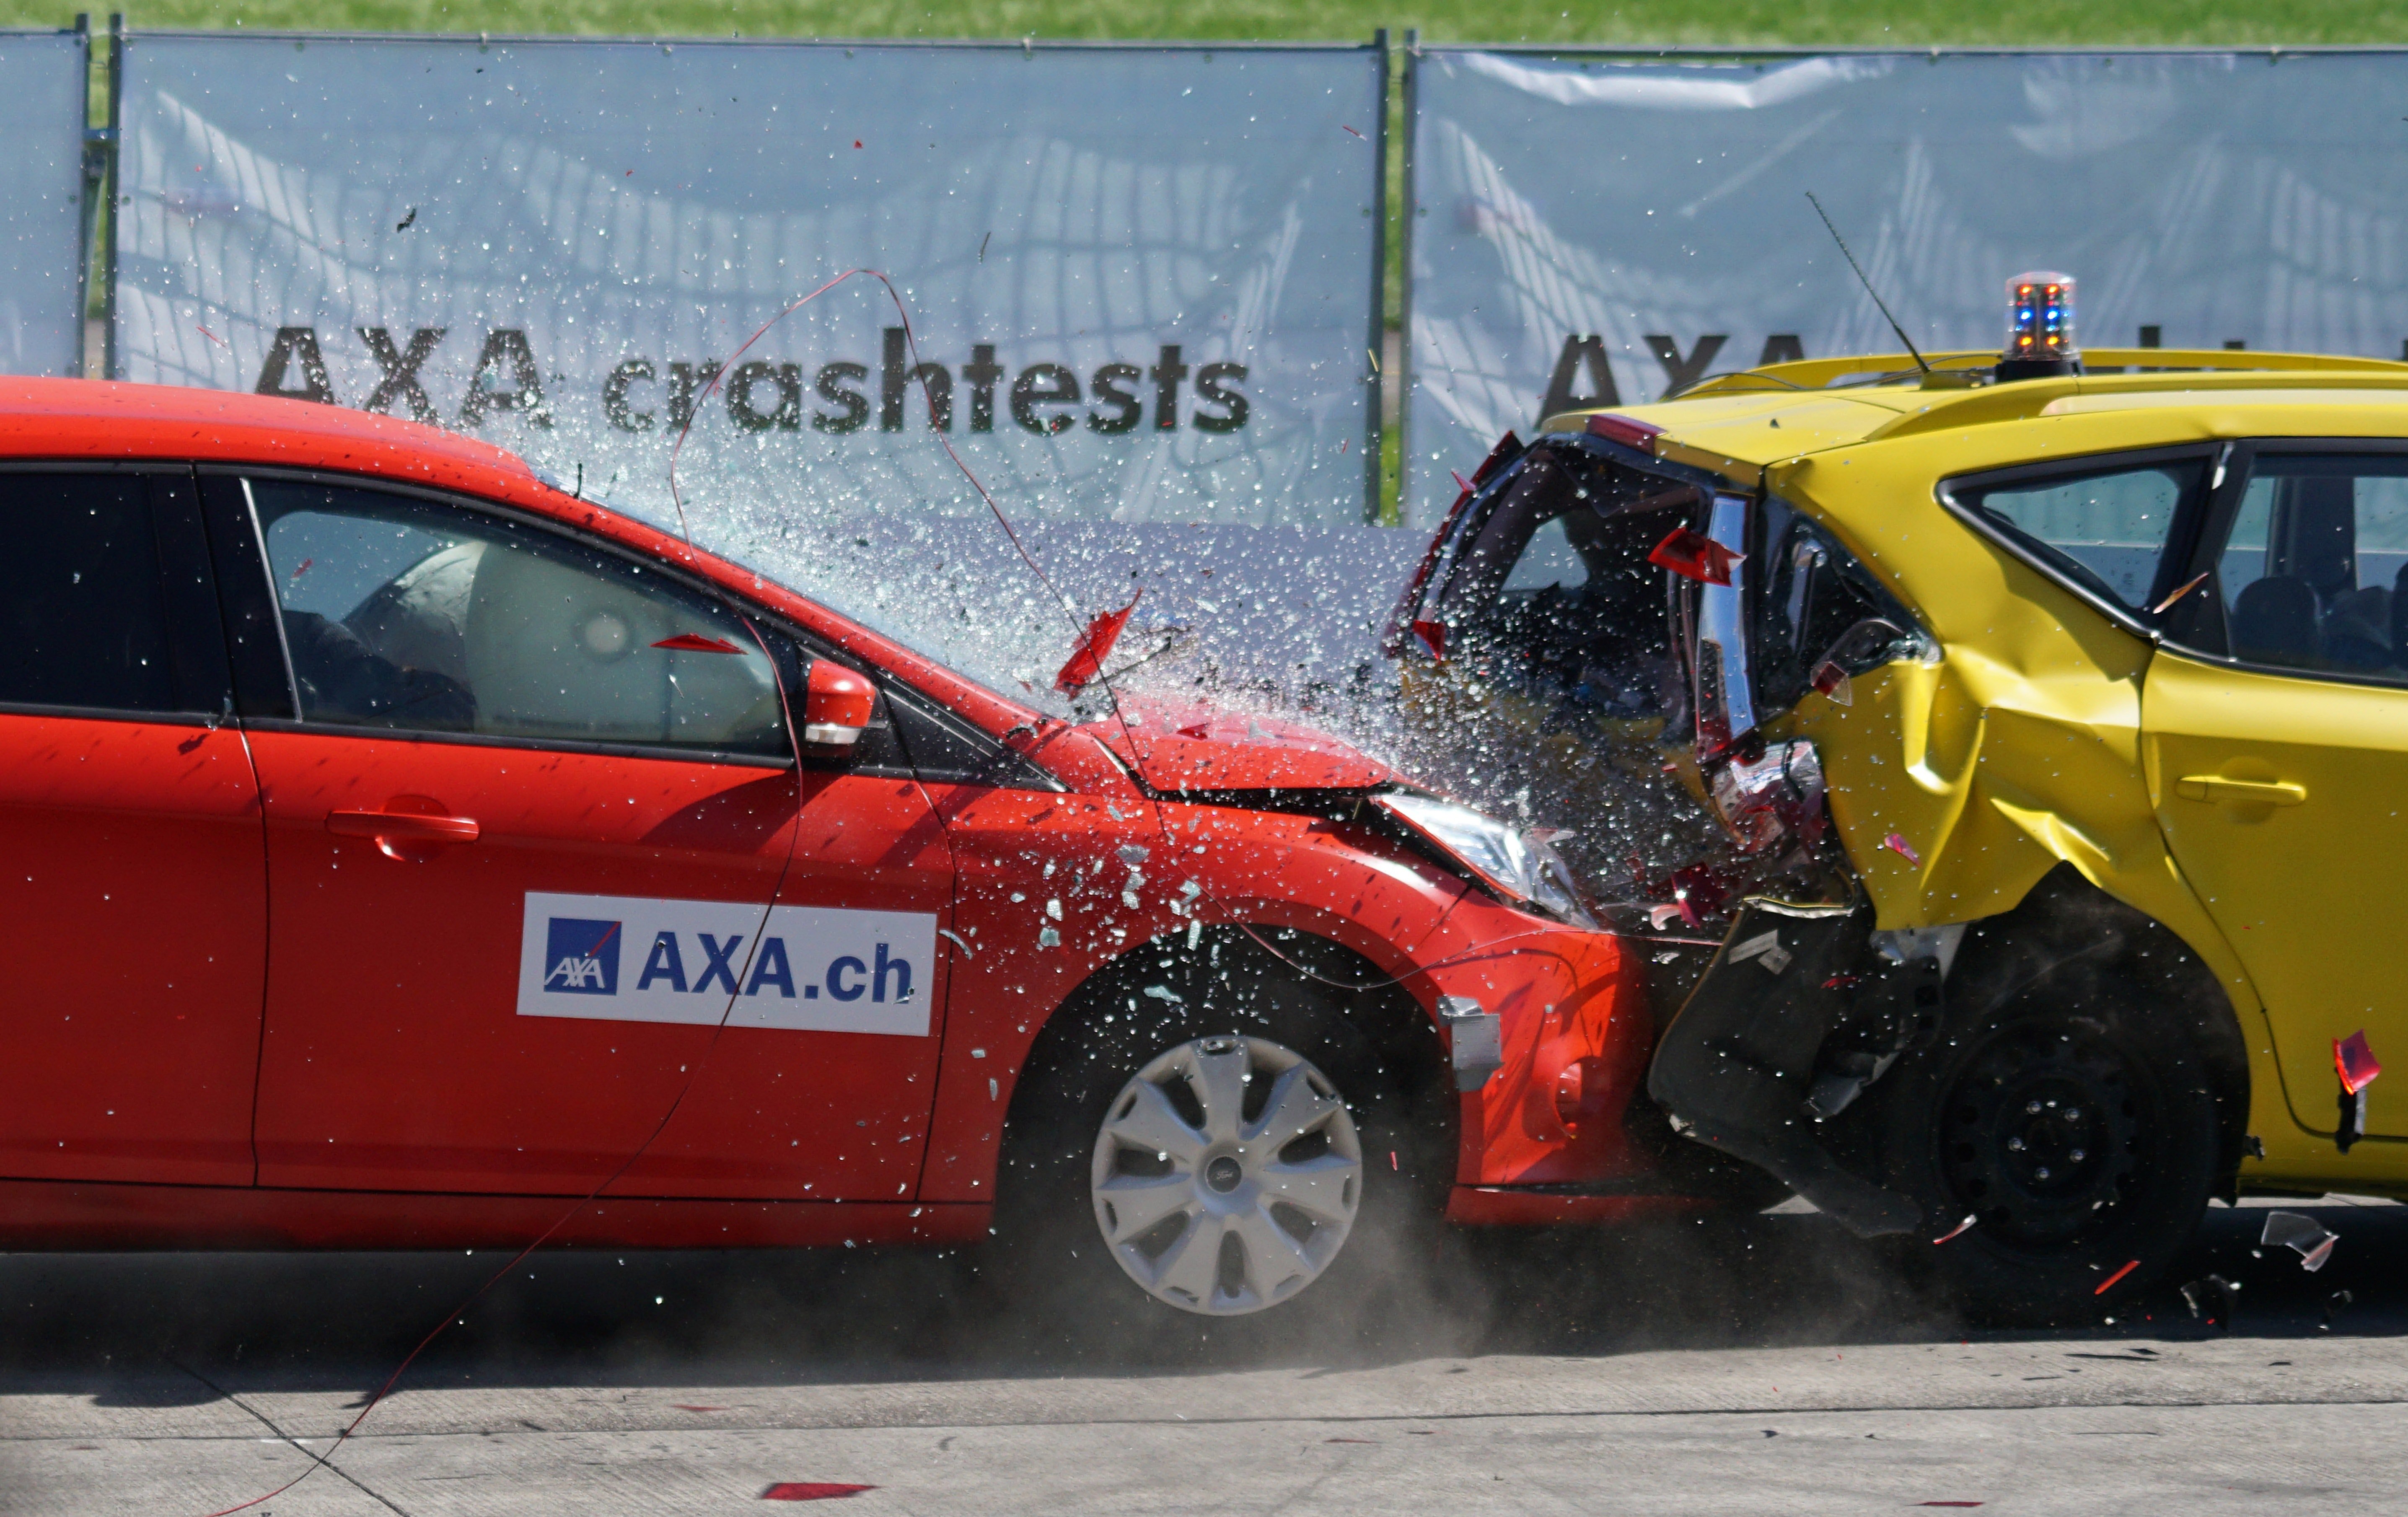 Two cars crashing into each other | Photo: Pexels